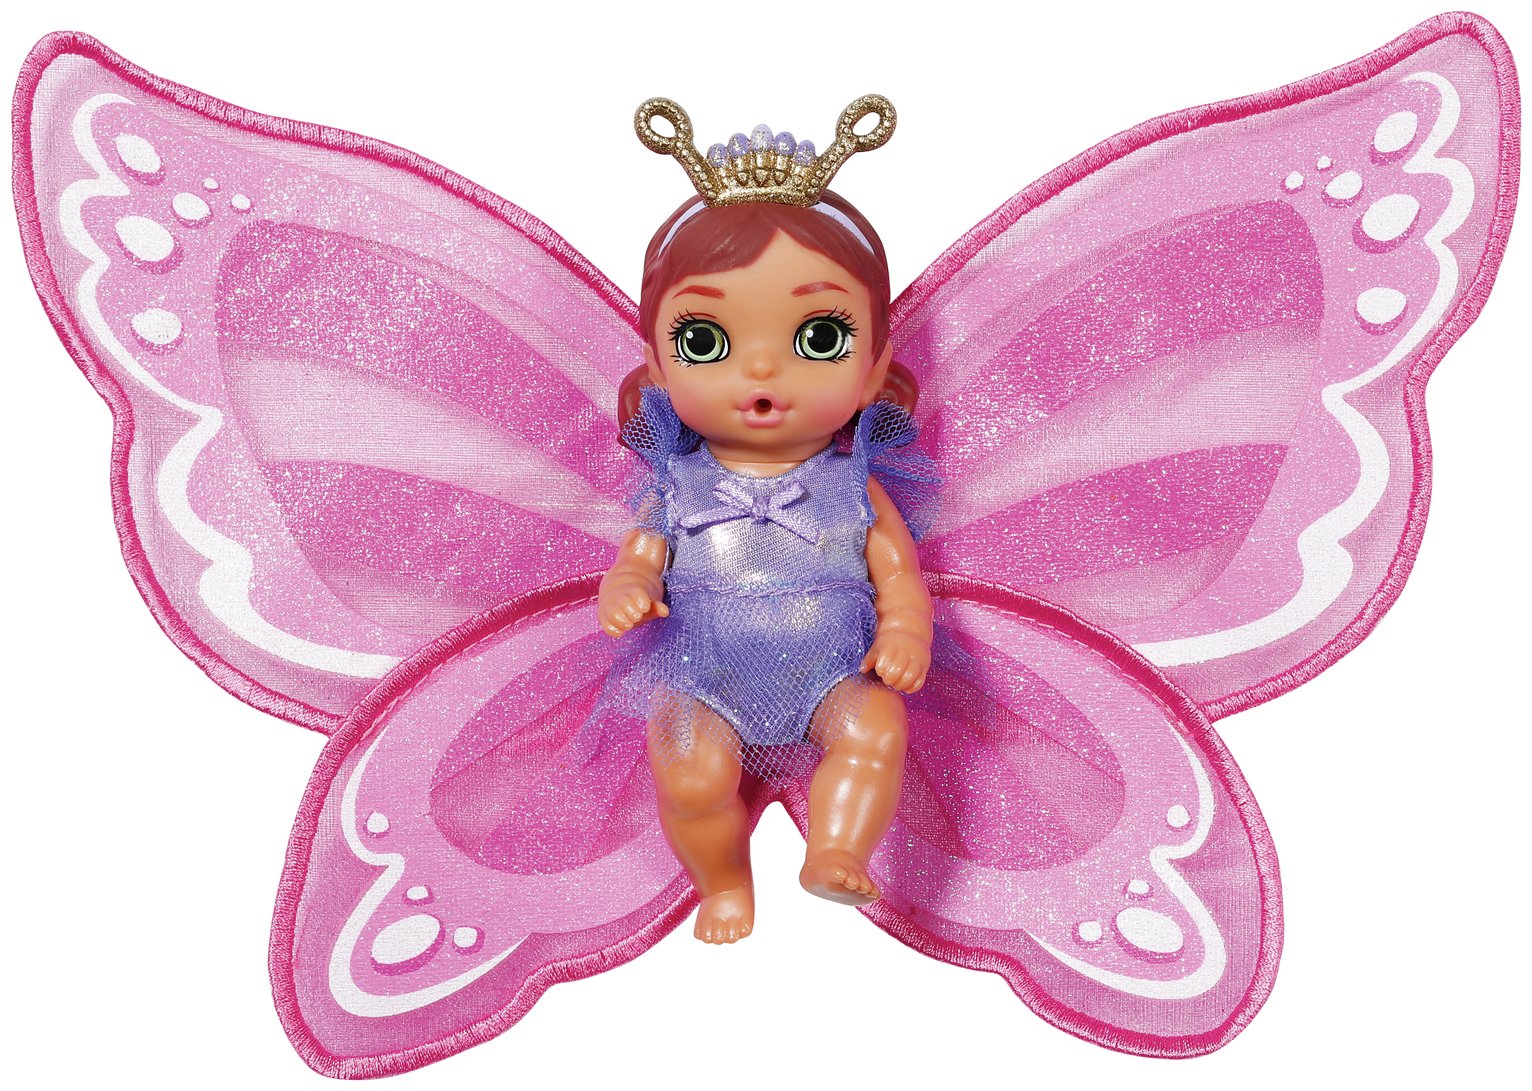 BABY born Surprise Butterfly Babies Assortment - 4inch/11cm